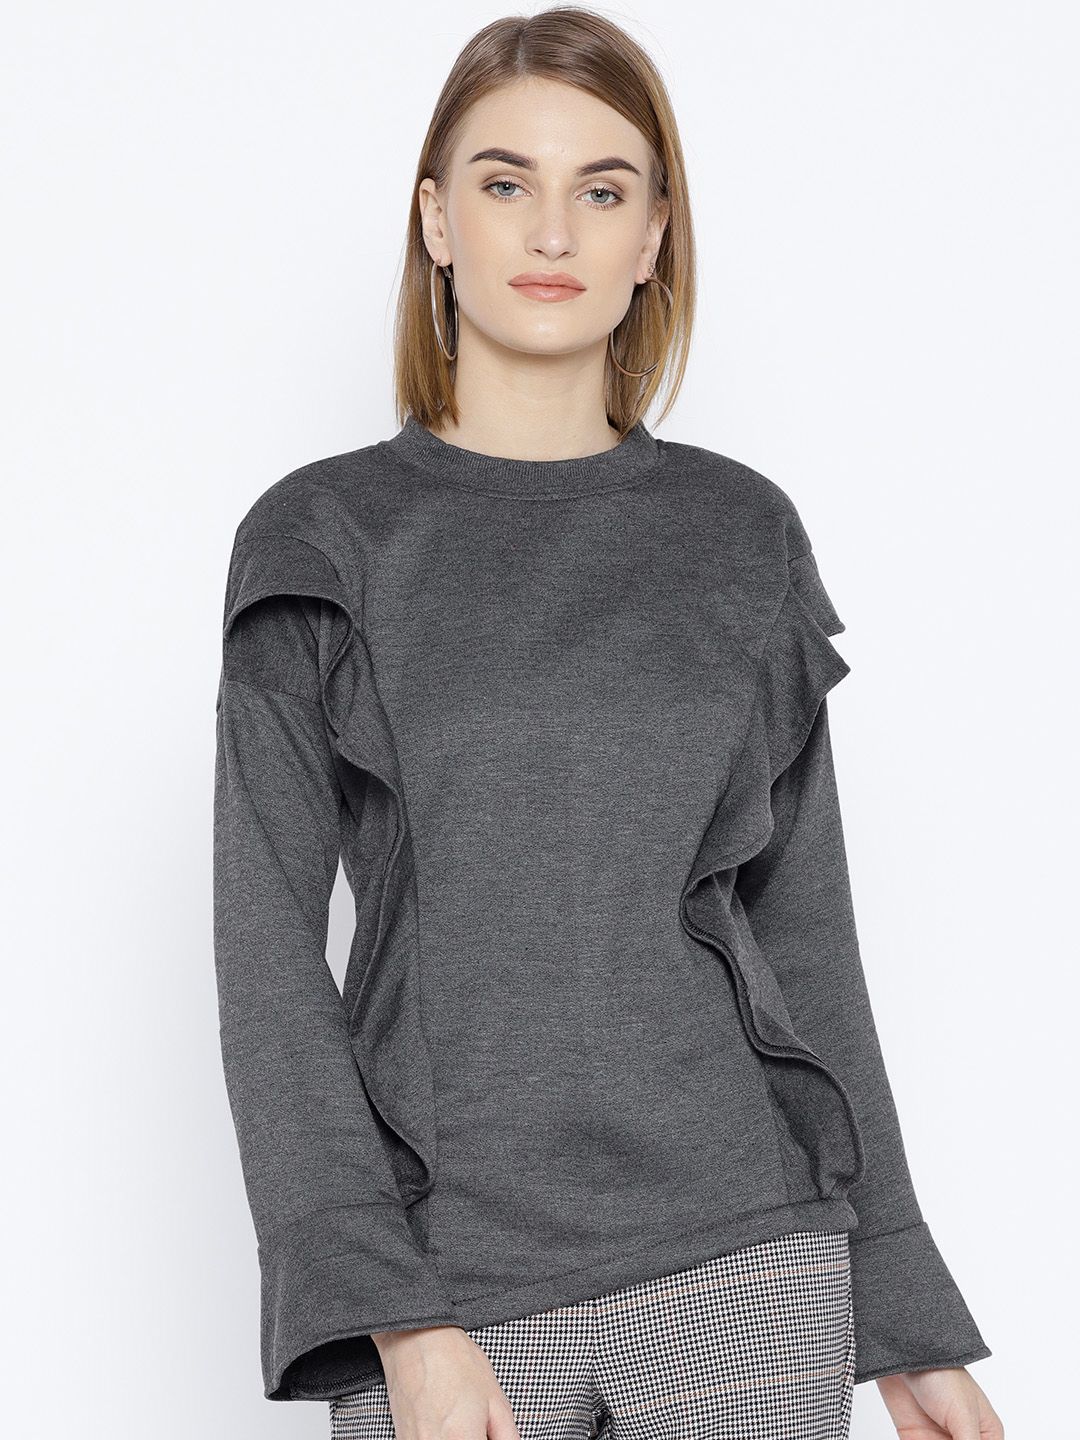 Belle Fille Women Charcoal Solid Sweatshirt with Ruffle Detail Price in India